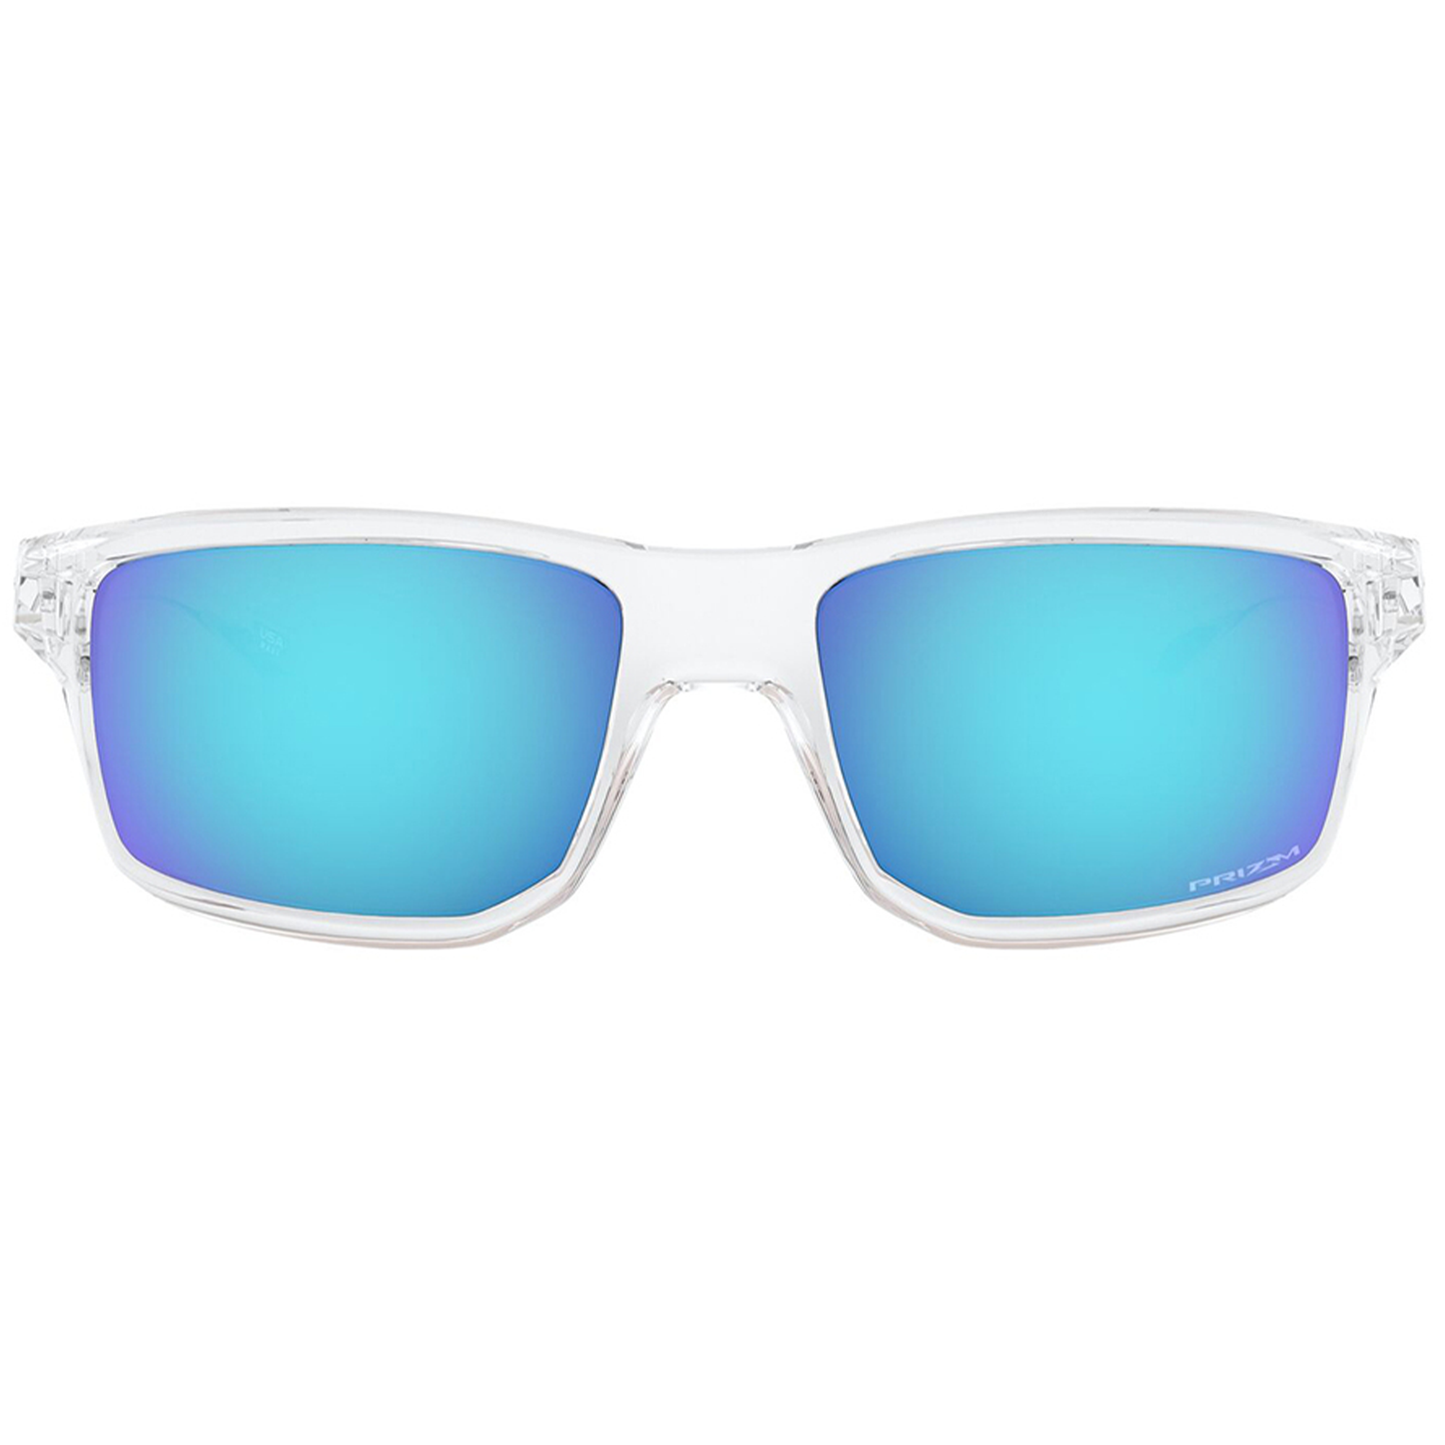 Oakley Gibston Sunglasses (Polished Clear) Prizm Sapphire Lens - Free Case